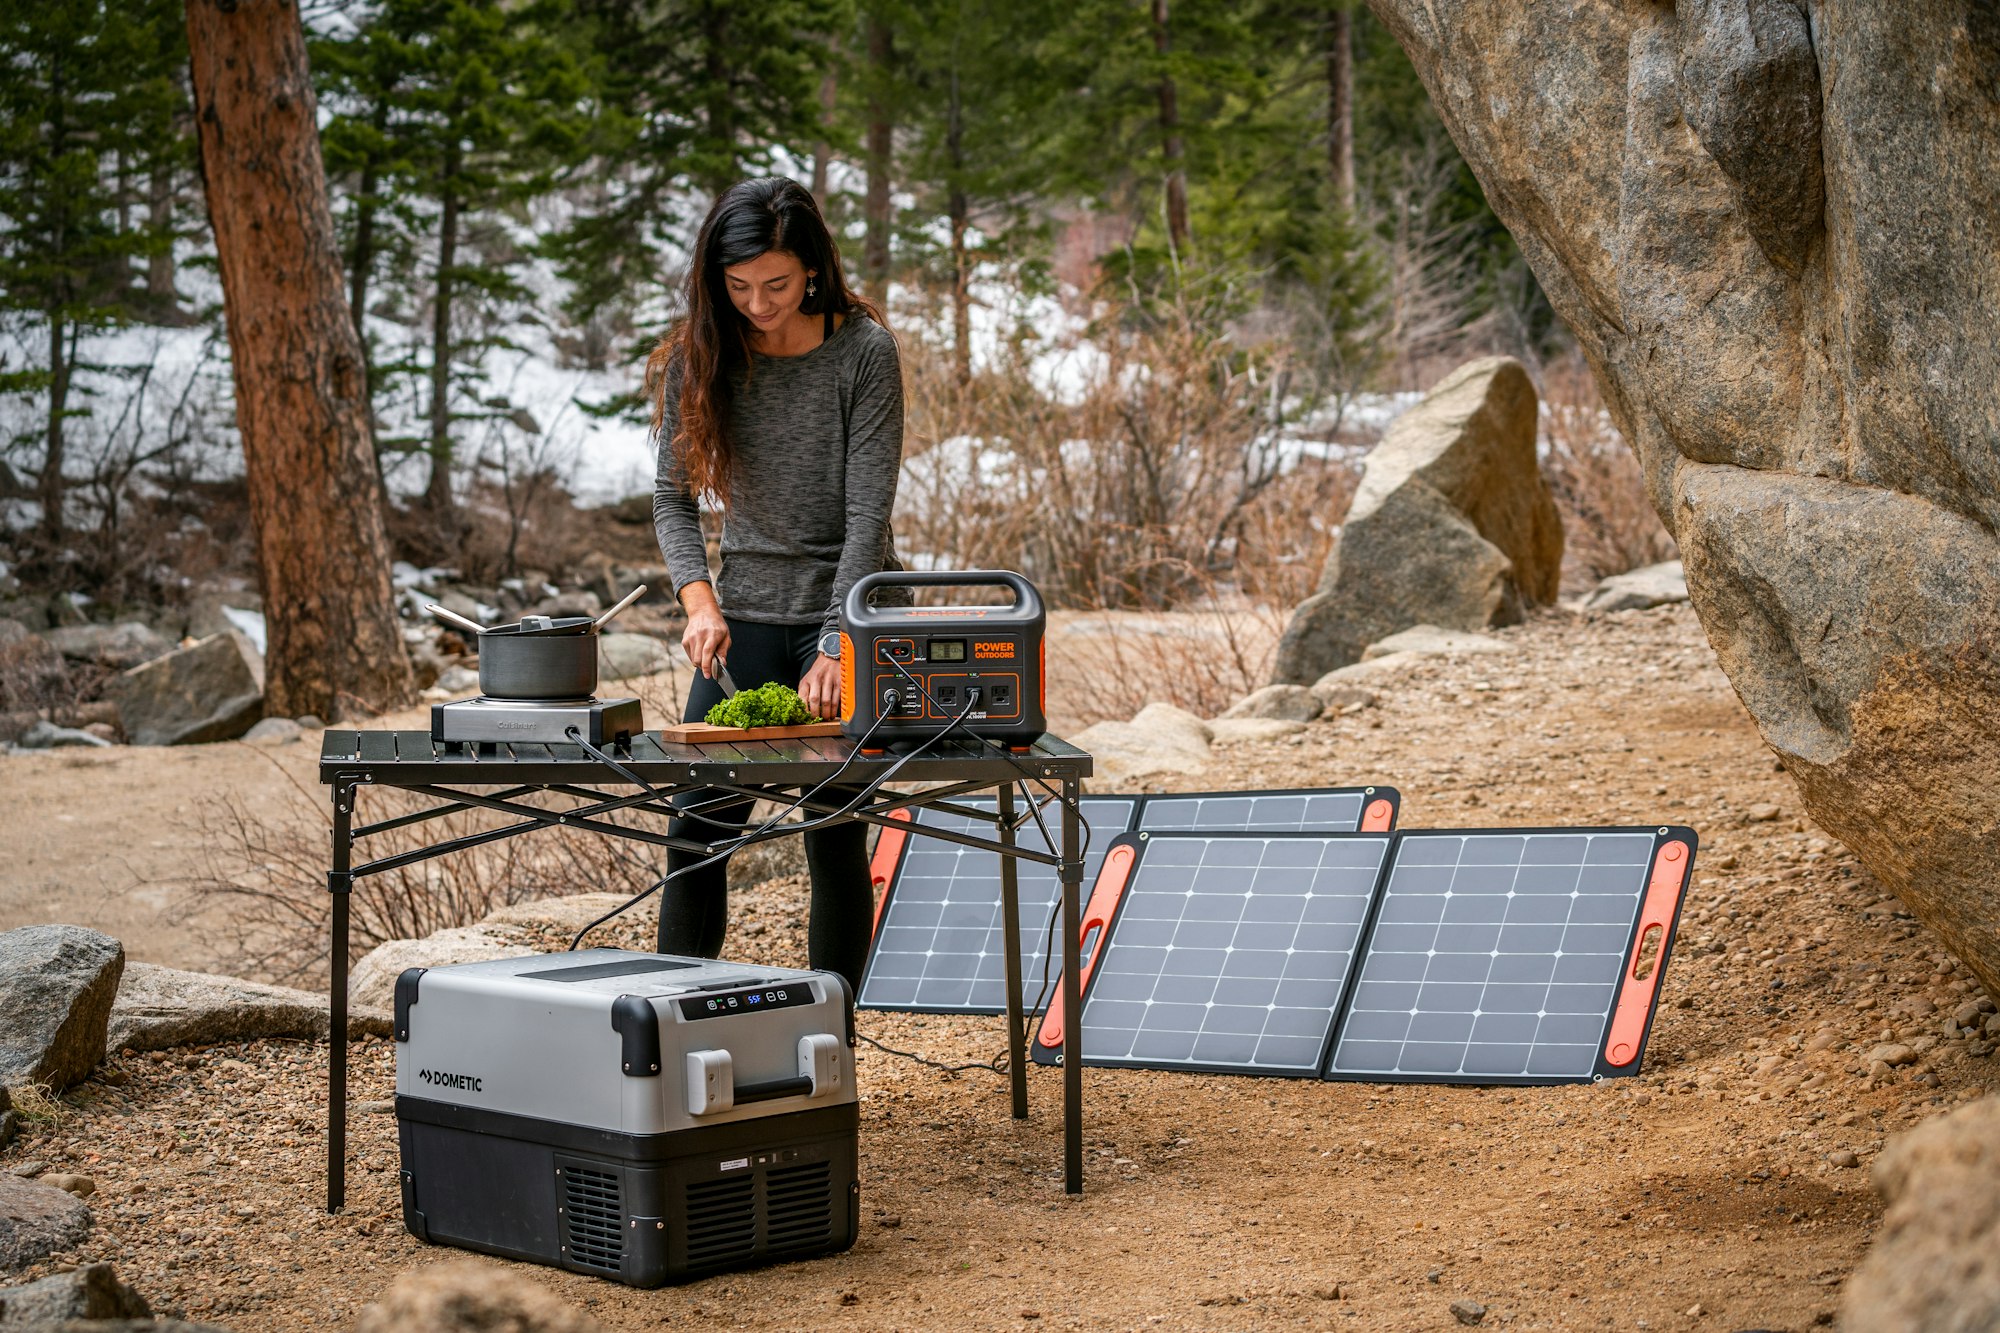 POWER UP YOUR CAMPING ADVENTURE WITH SOLAR PANELS